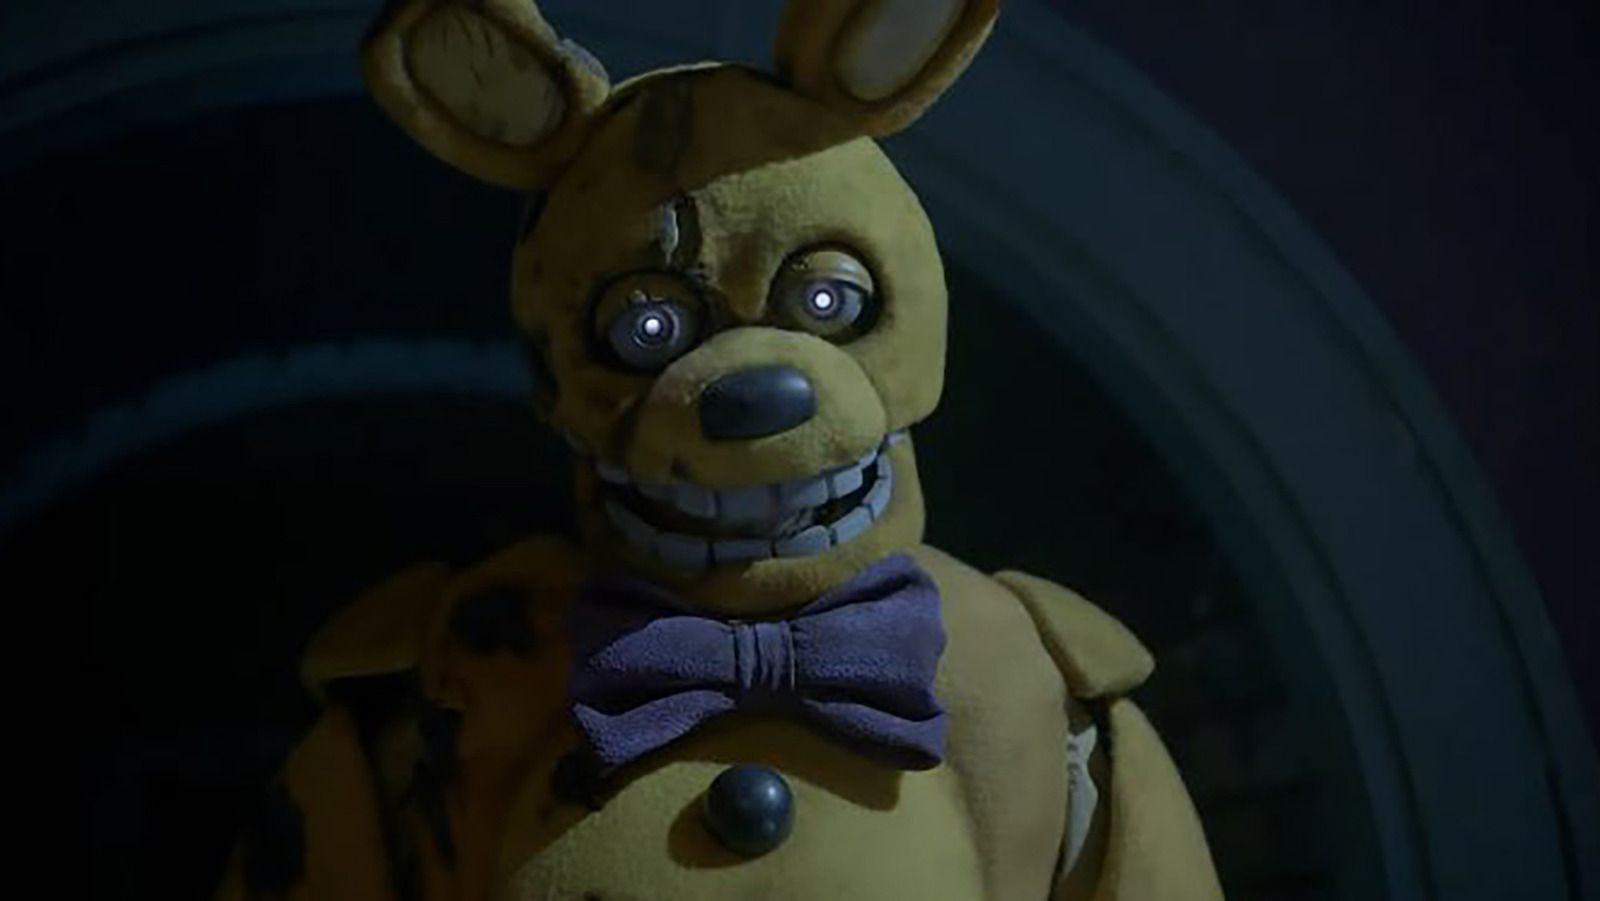 That Five Nights At Freddys Credits Scene Needs An Explainer Film The Blast Breaking